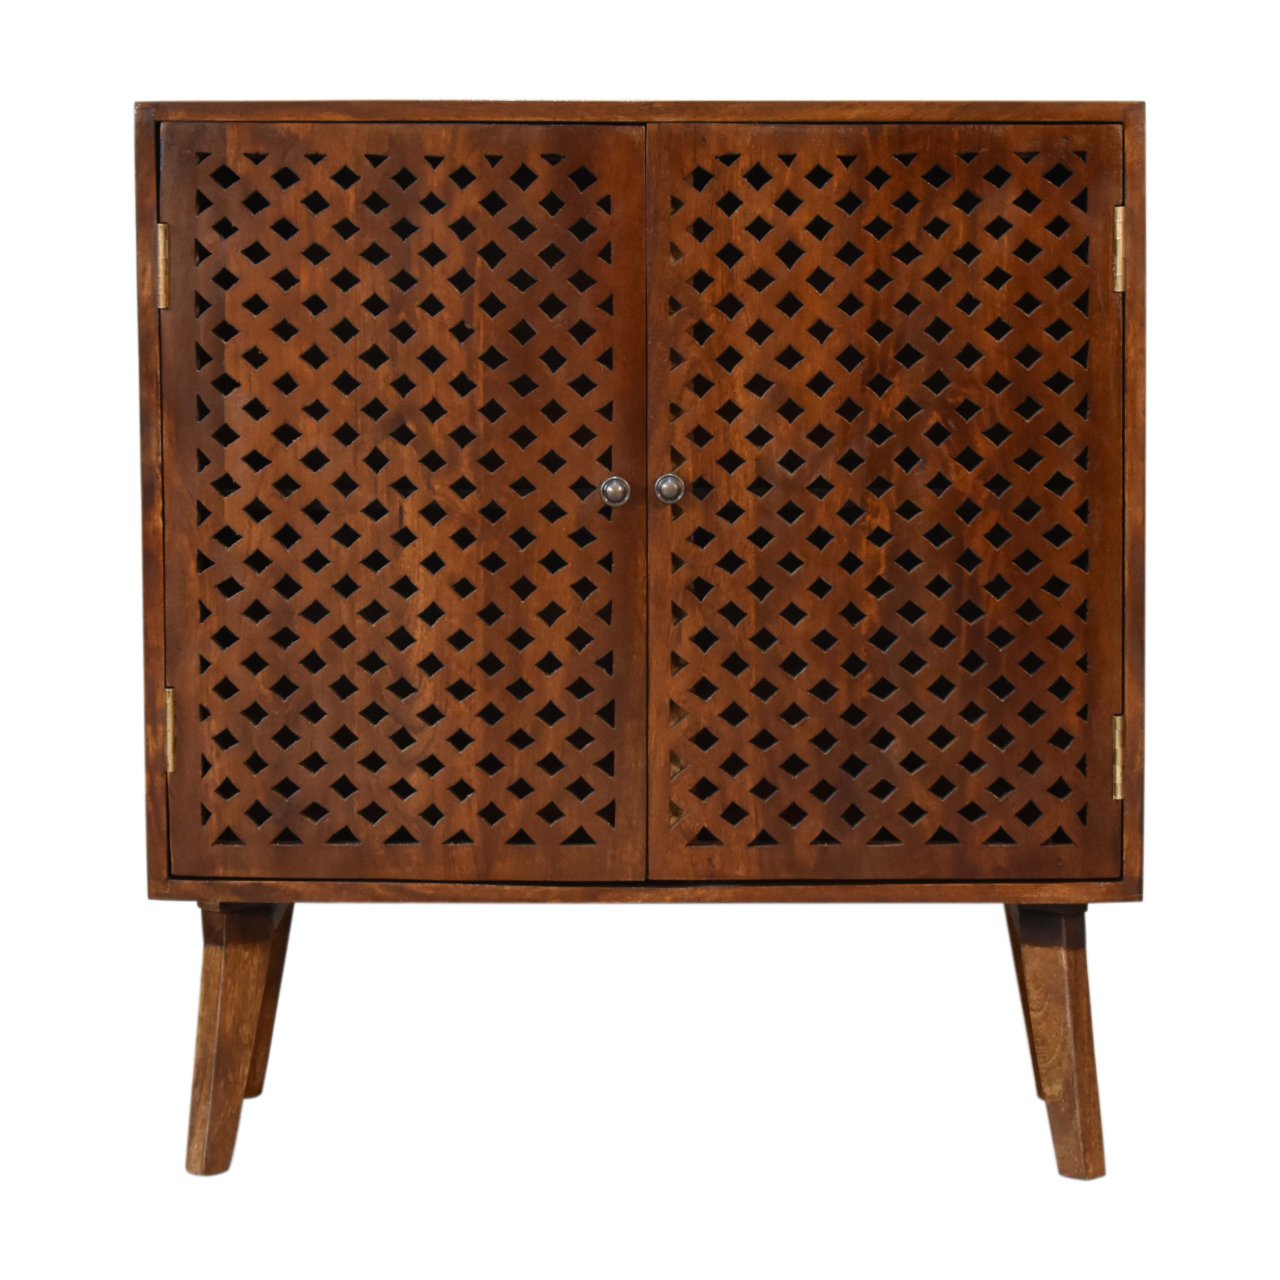 Arlo Cabinet - Red Ross Retail-Furniture Specialists 